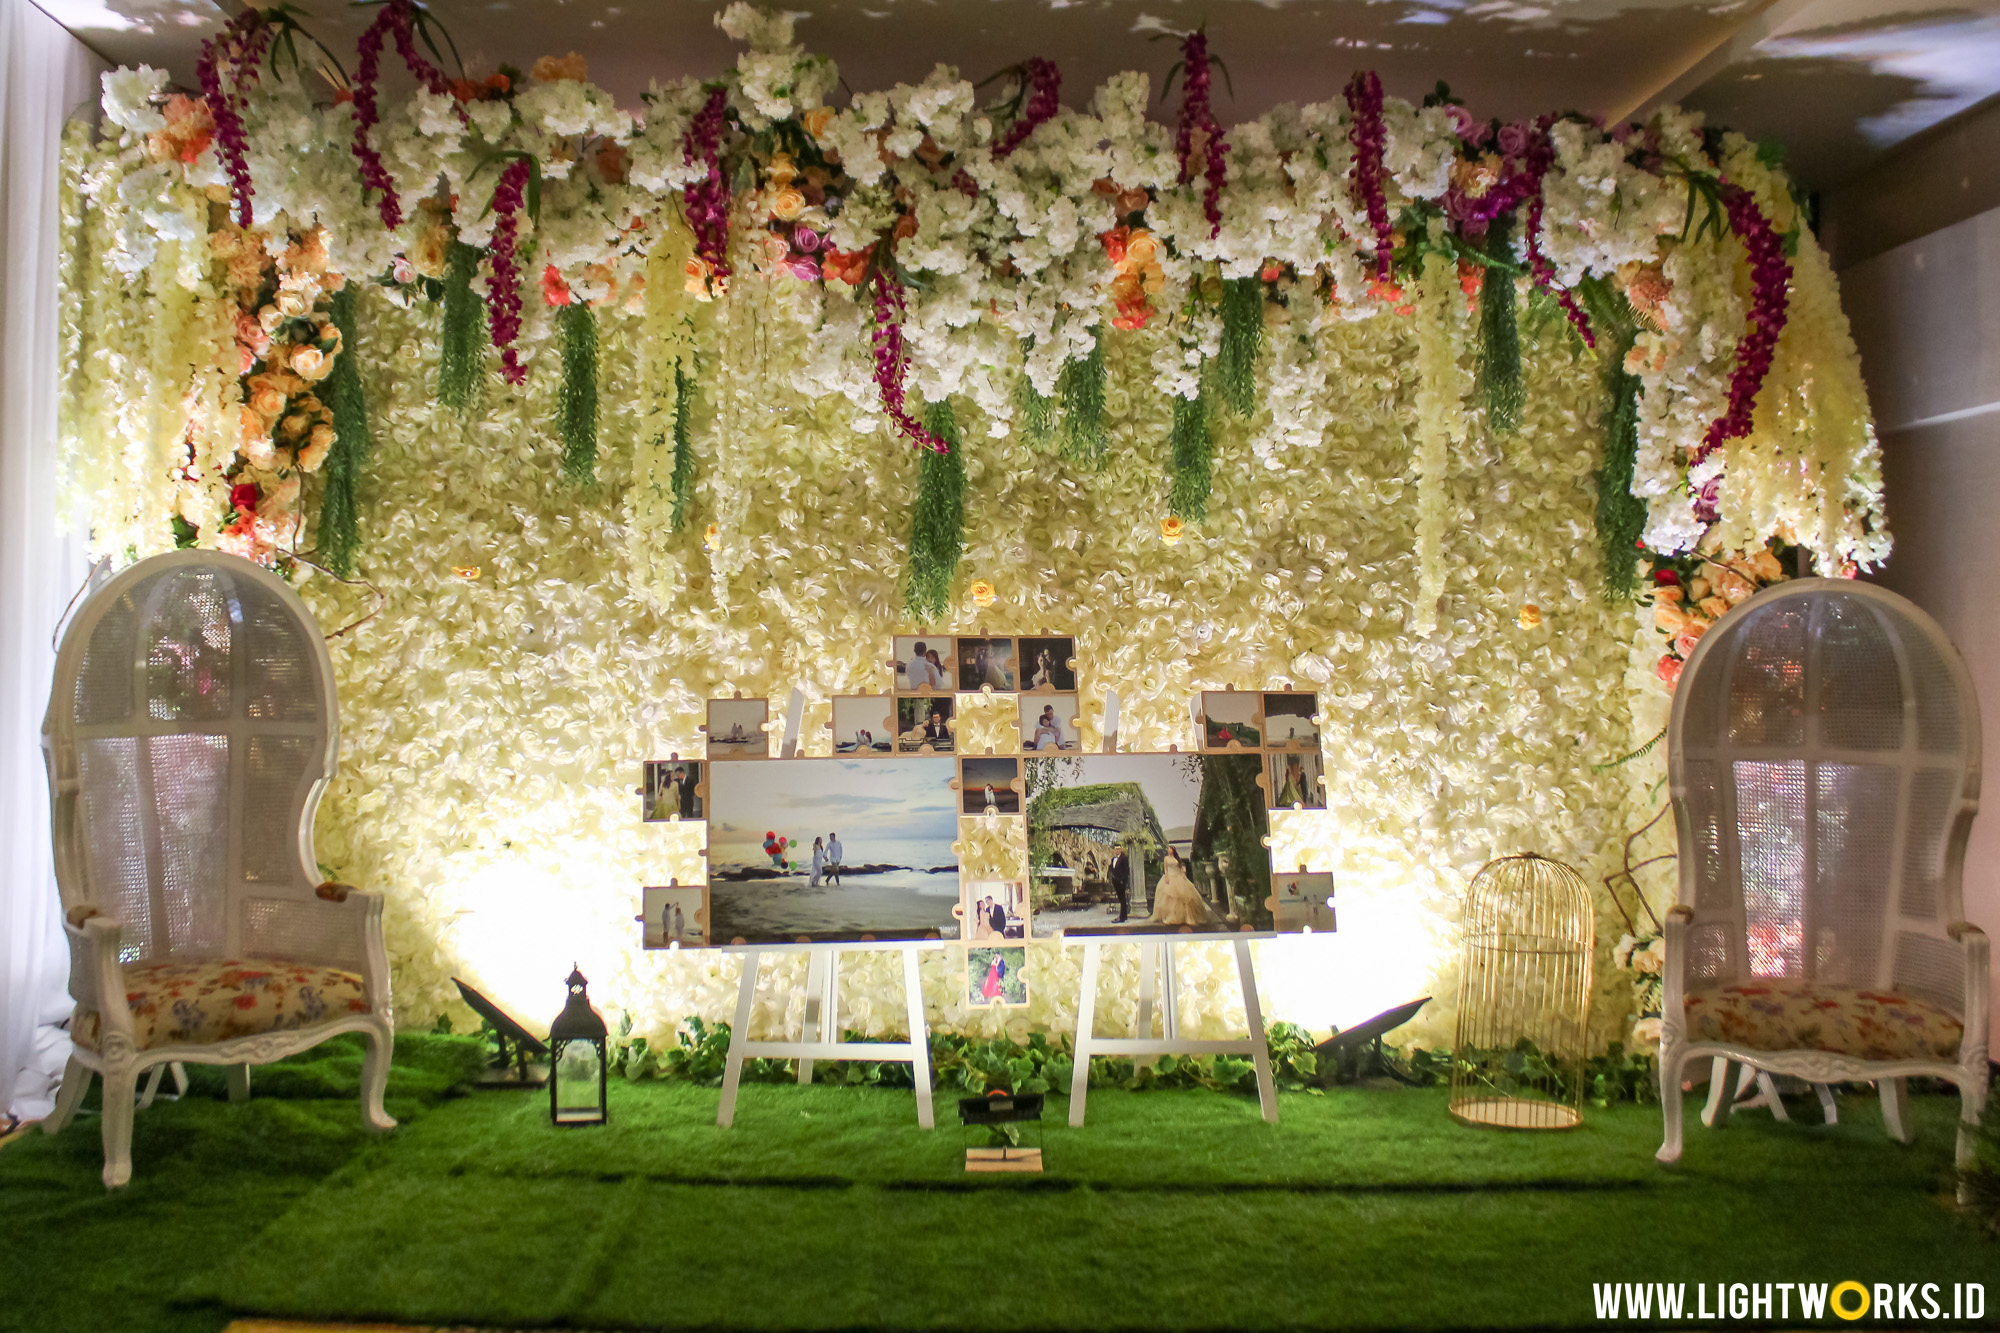 Wedding of Julfendra and Mell | Venue at Discovery Convention and Hotel Ancol | Decoration by White Pearl Decoration | Organised by Partee Organiser | MC: Adi Chandra | Entertainment by Red Velvet Entertainment | Handbouquet by Pre Fleur Indonesia | Suit by Wong Hang Tailor | Gown by Ritz Taipei | Make up artist by Winnie Neuman | Photo and video by Maximus Pictures | Wedding cake by Eiffel Cake | Wedding car by Fendi Wedding Car | Photobooth by Mustard Photobooth | Souvenir by Fine Wedding Souvenir | Wedding Ring by Miss Mondial | Groom’s Corsage by Smitten | Lighting by Lightworks